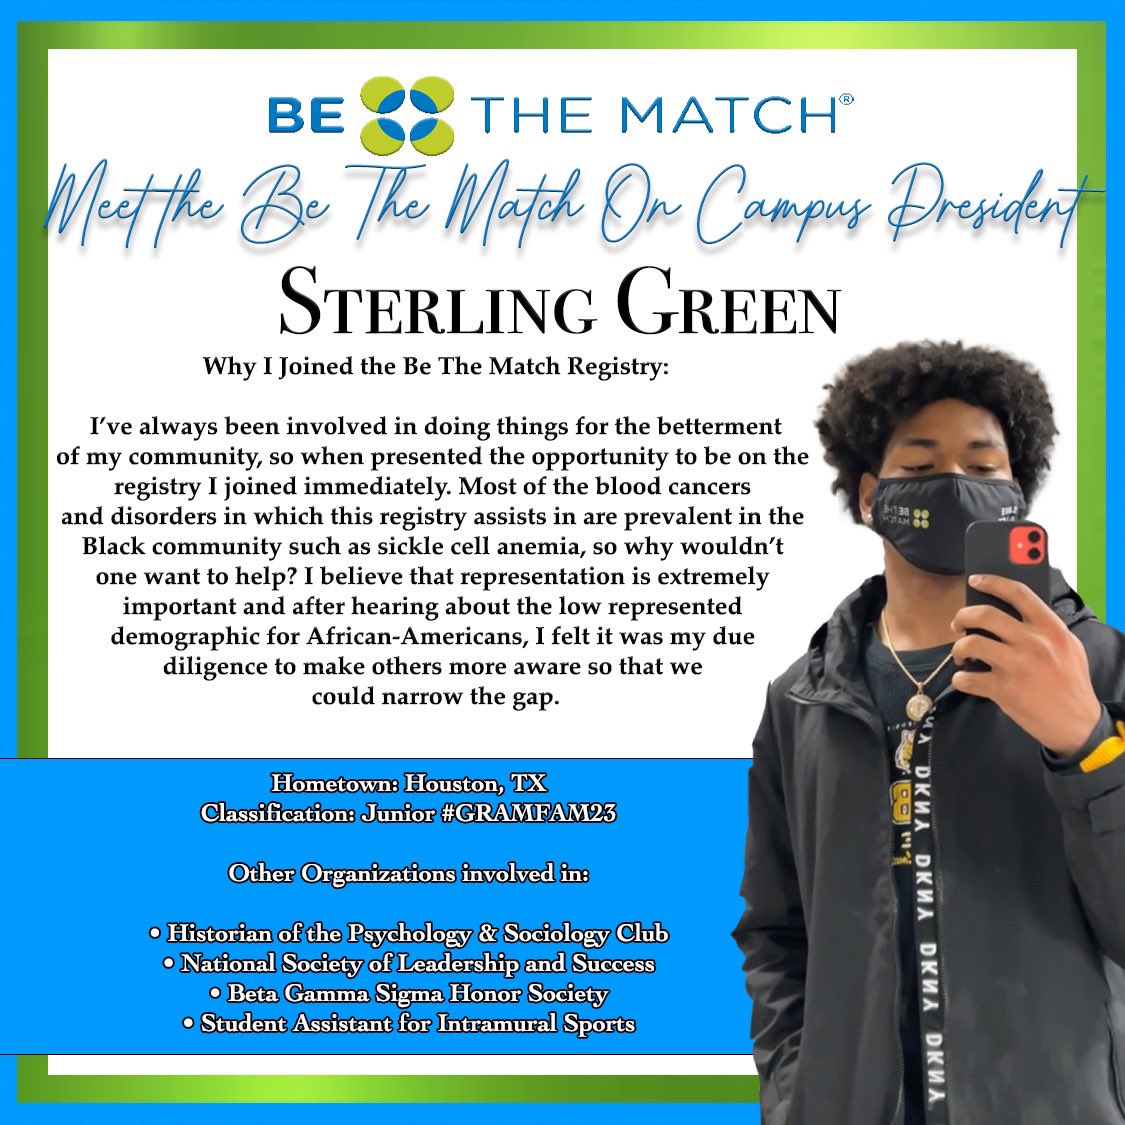 #WhyWednesdays are BACK! Meet Be The Match On Campus President, Sterling Green, and see why he decided to join the registry ! 

#WhyWednesday #BeTheMatch #GramFam